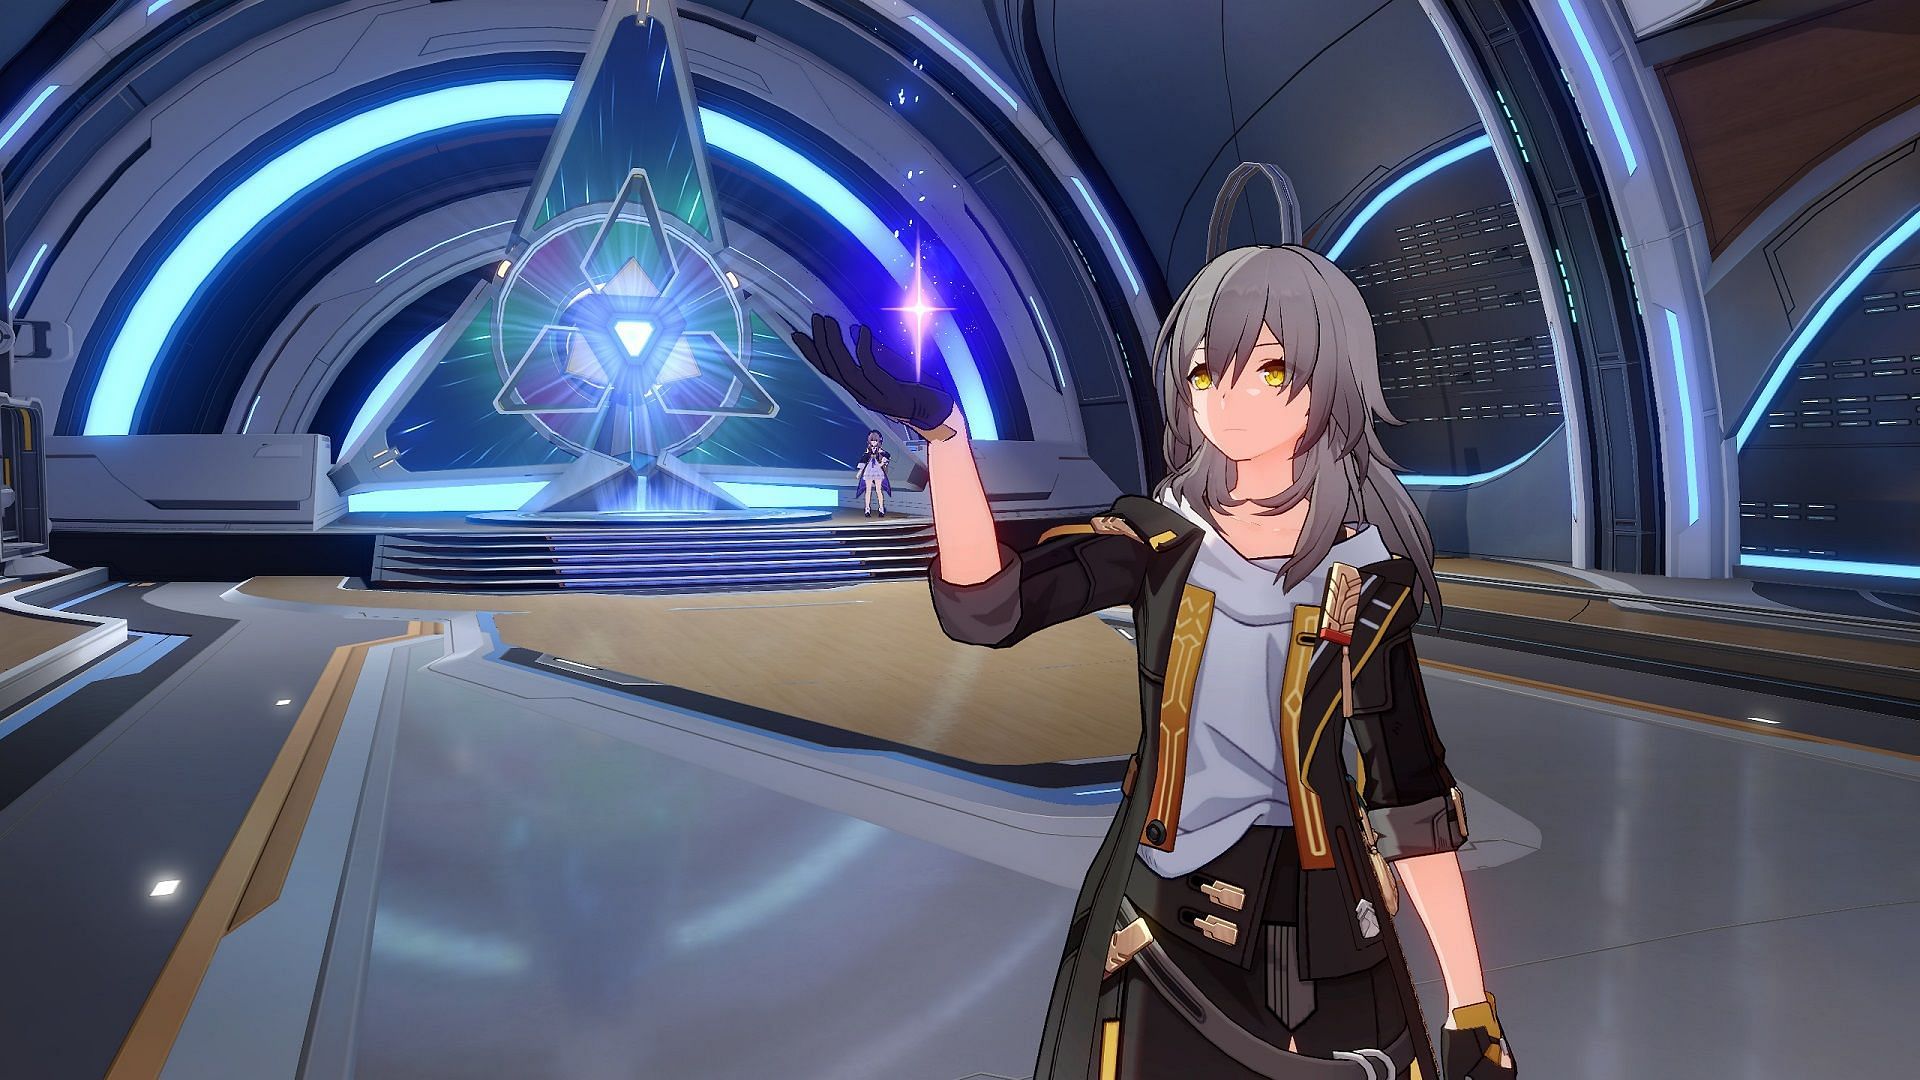 Honkai Star Rail' Code Redemption: How to Redeem Them Online and